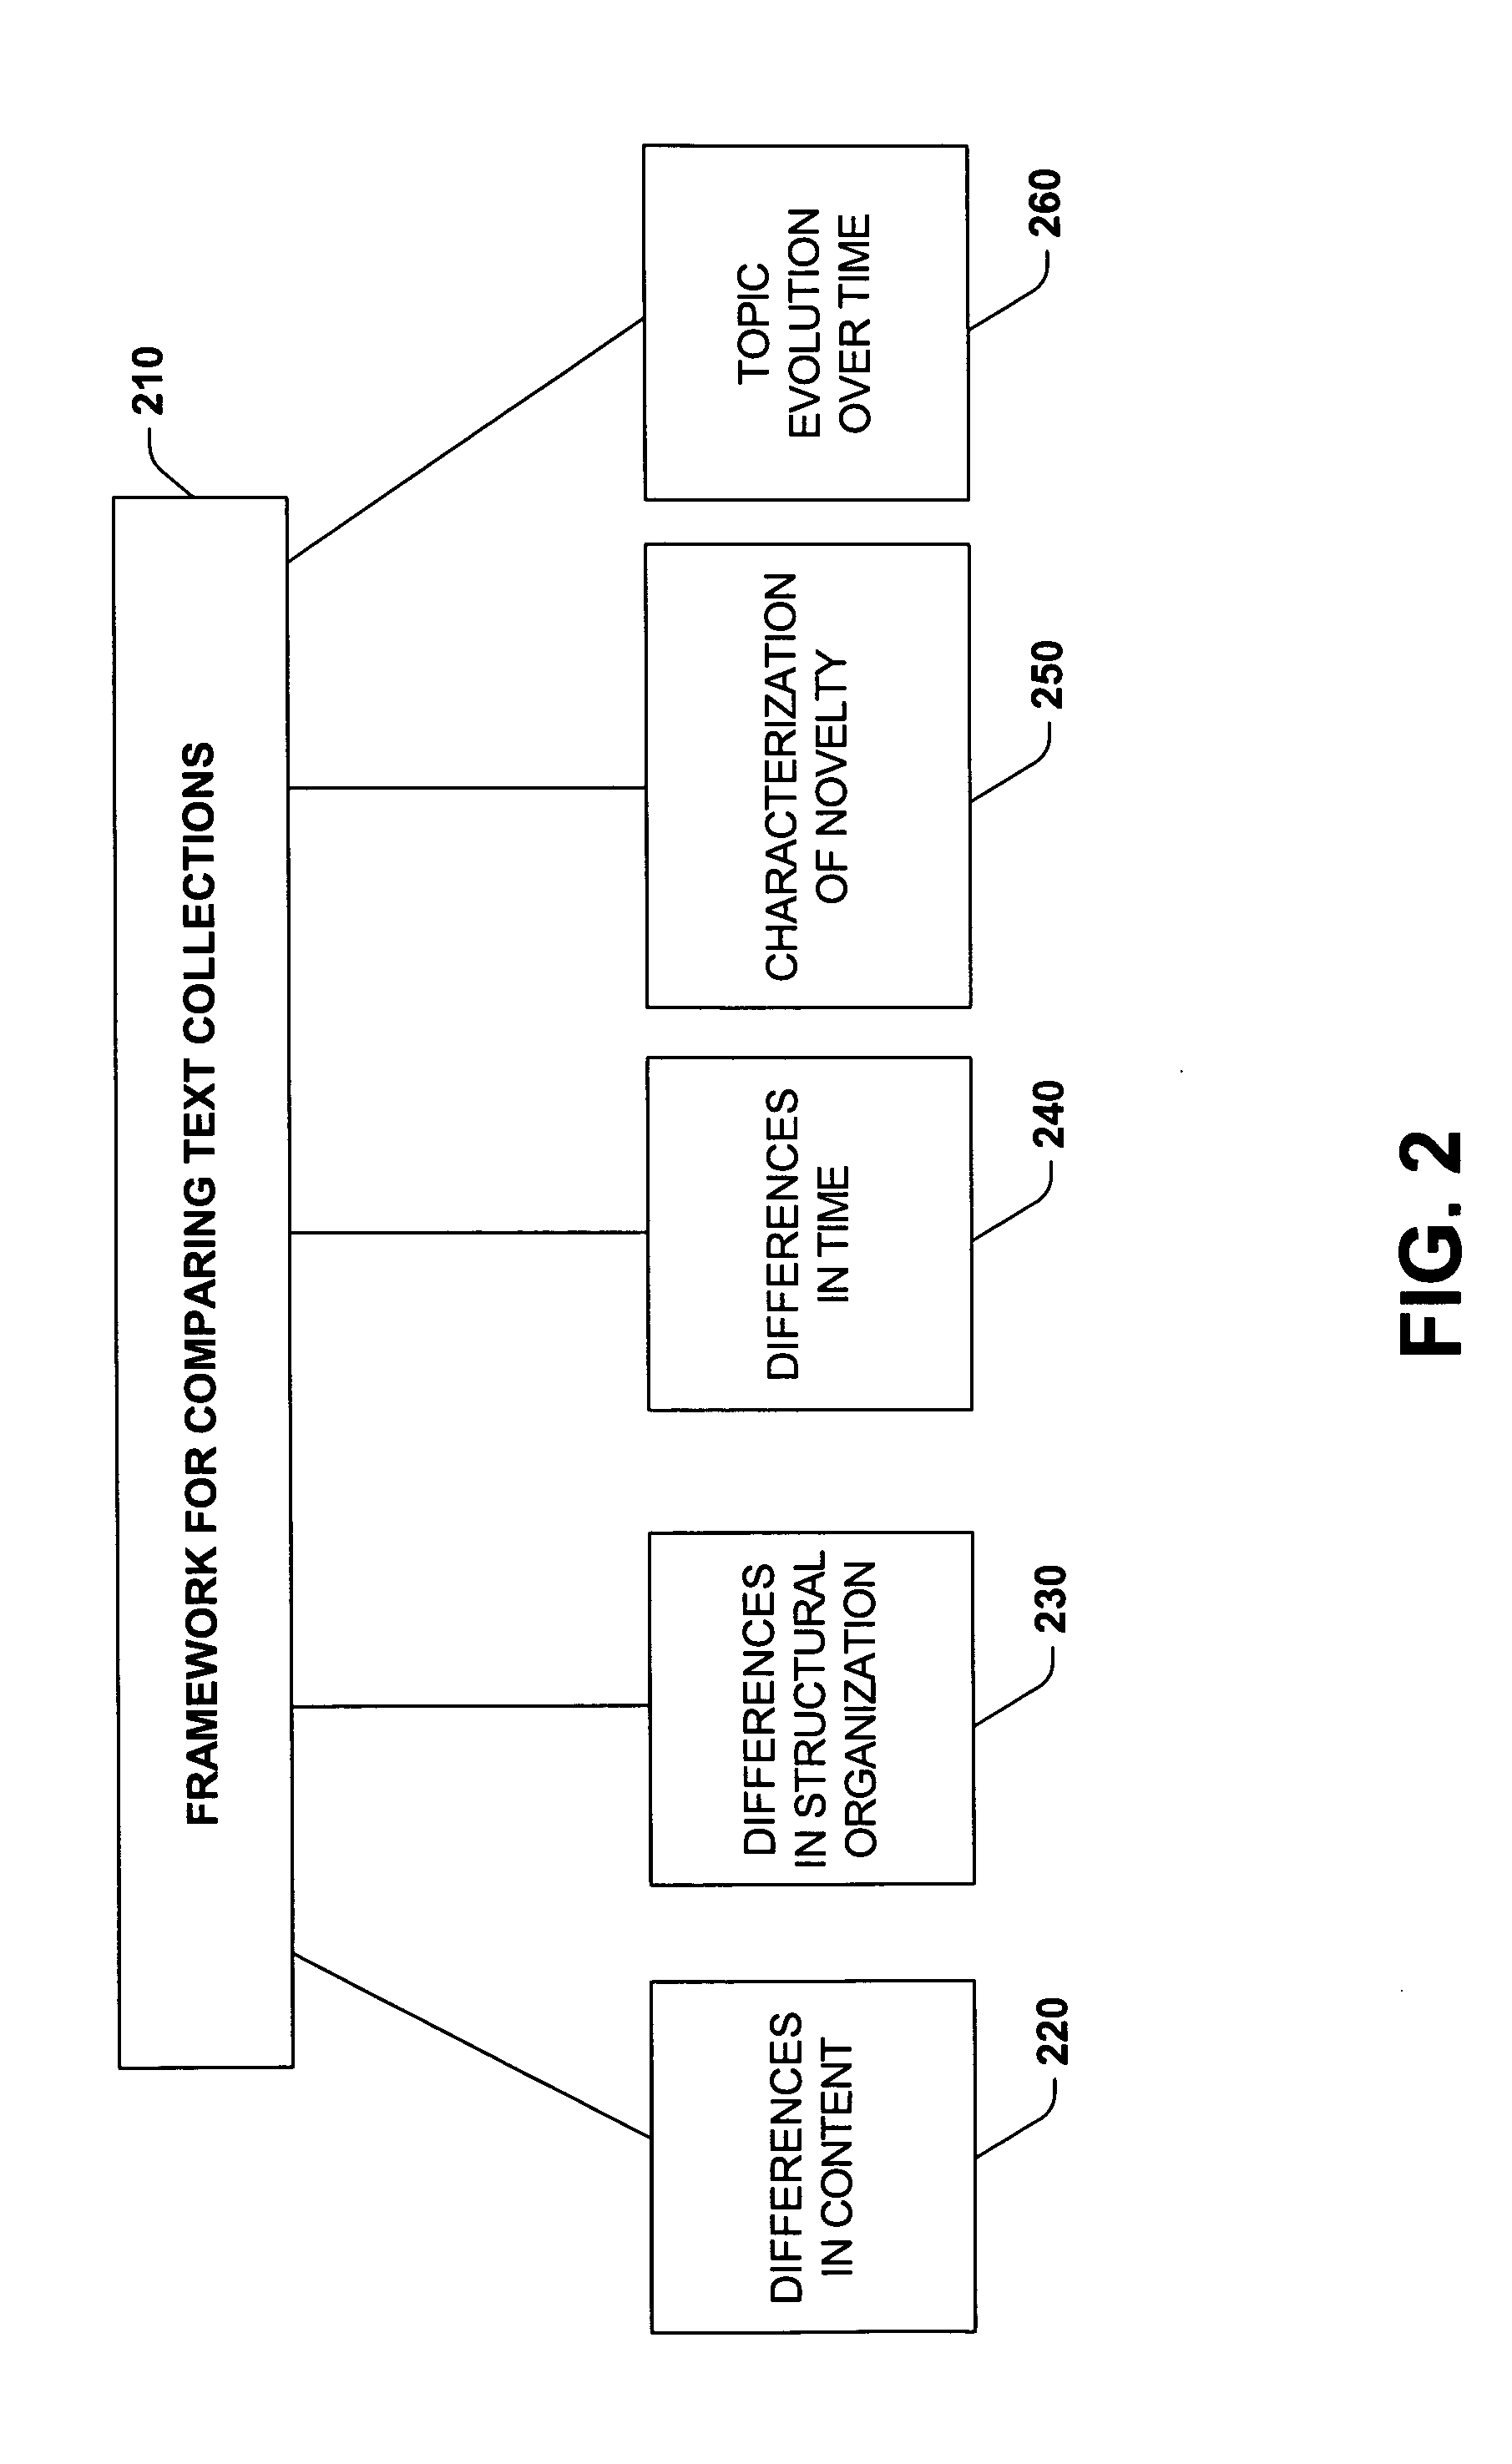 Principles and methods for personalizing newsfeeds via an analysis of information novelty and dynamics